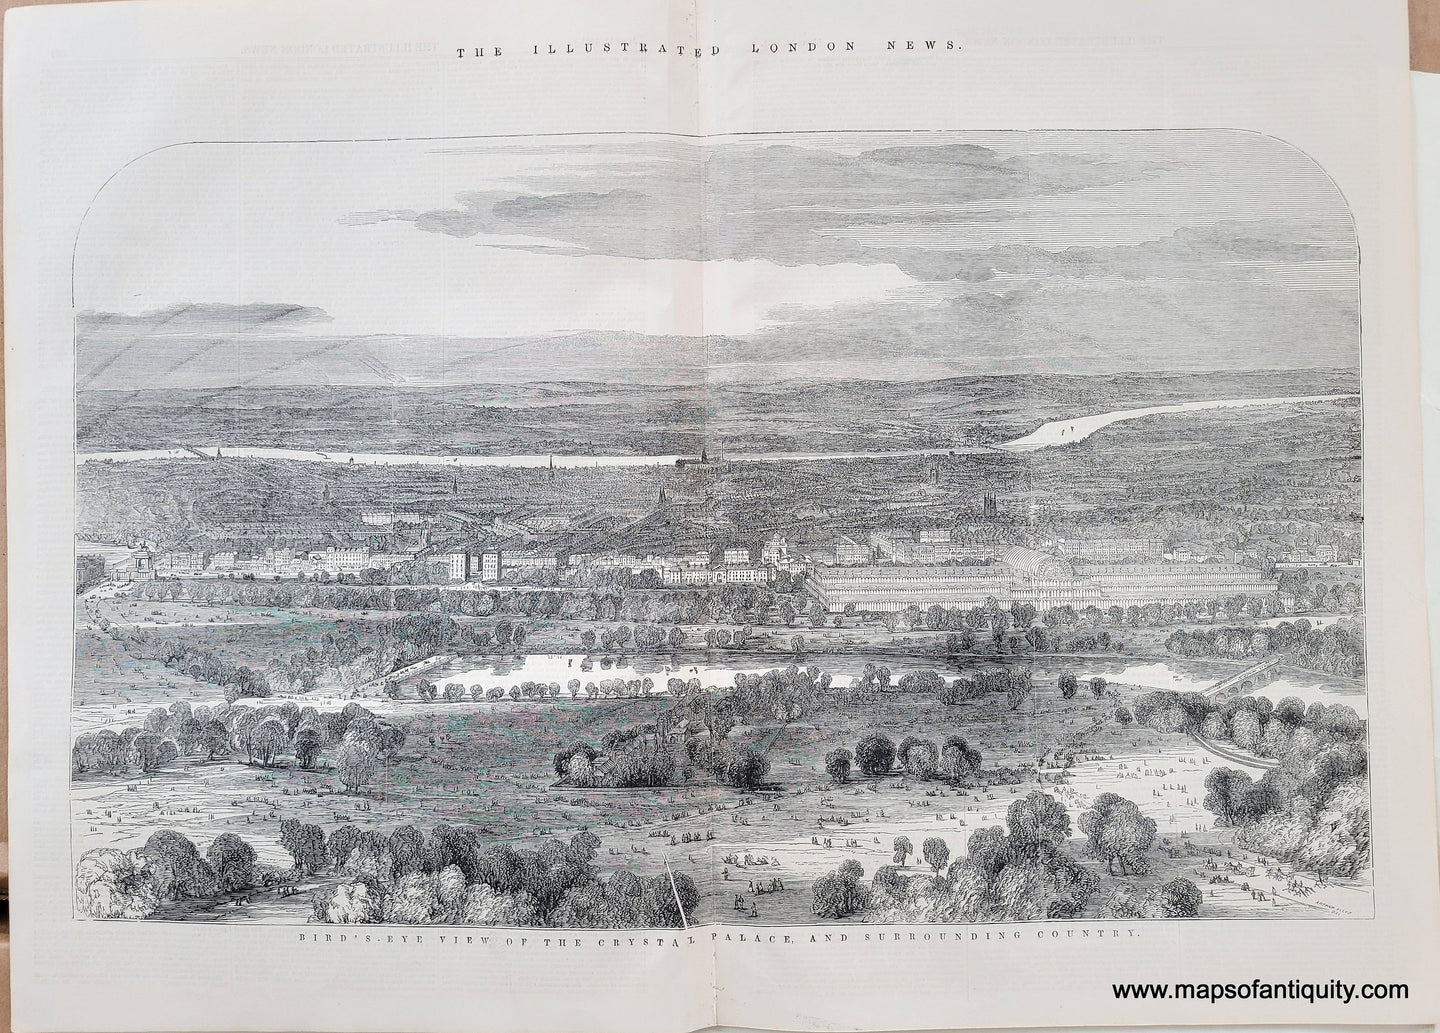 Genuine-Antique-Print-London---Birds-Eye-View-of-the-Crystal-Palace-and-Surrounding-Country-Antique-Prints-Other-Antique-Prints--1849-Illustrated-London-News-Maps-Of-Antiquity-1800s-19th-century